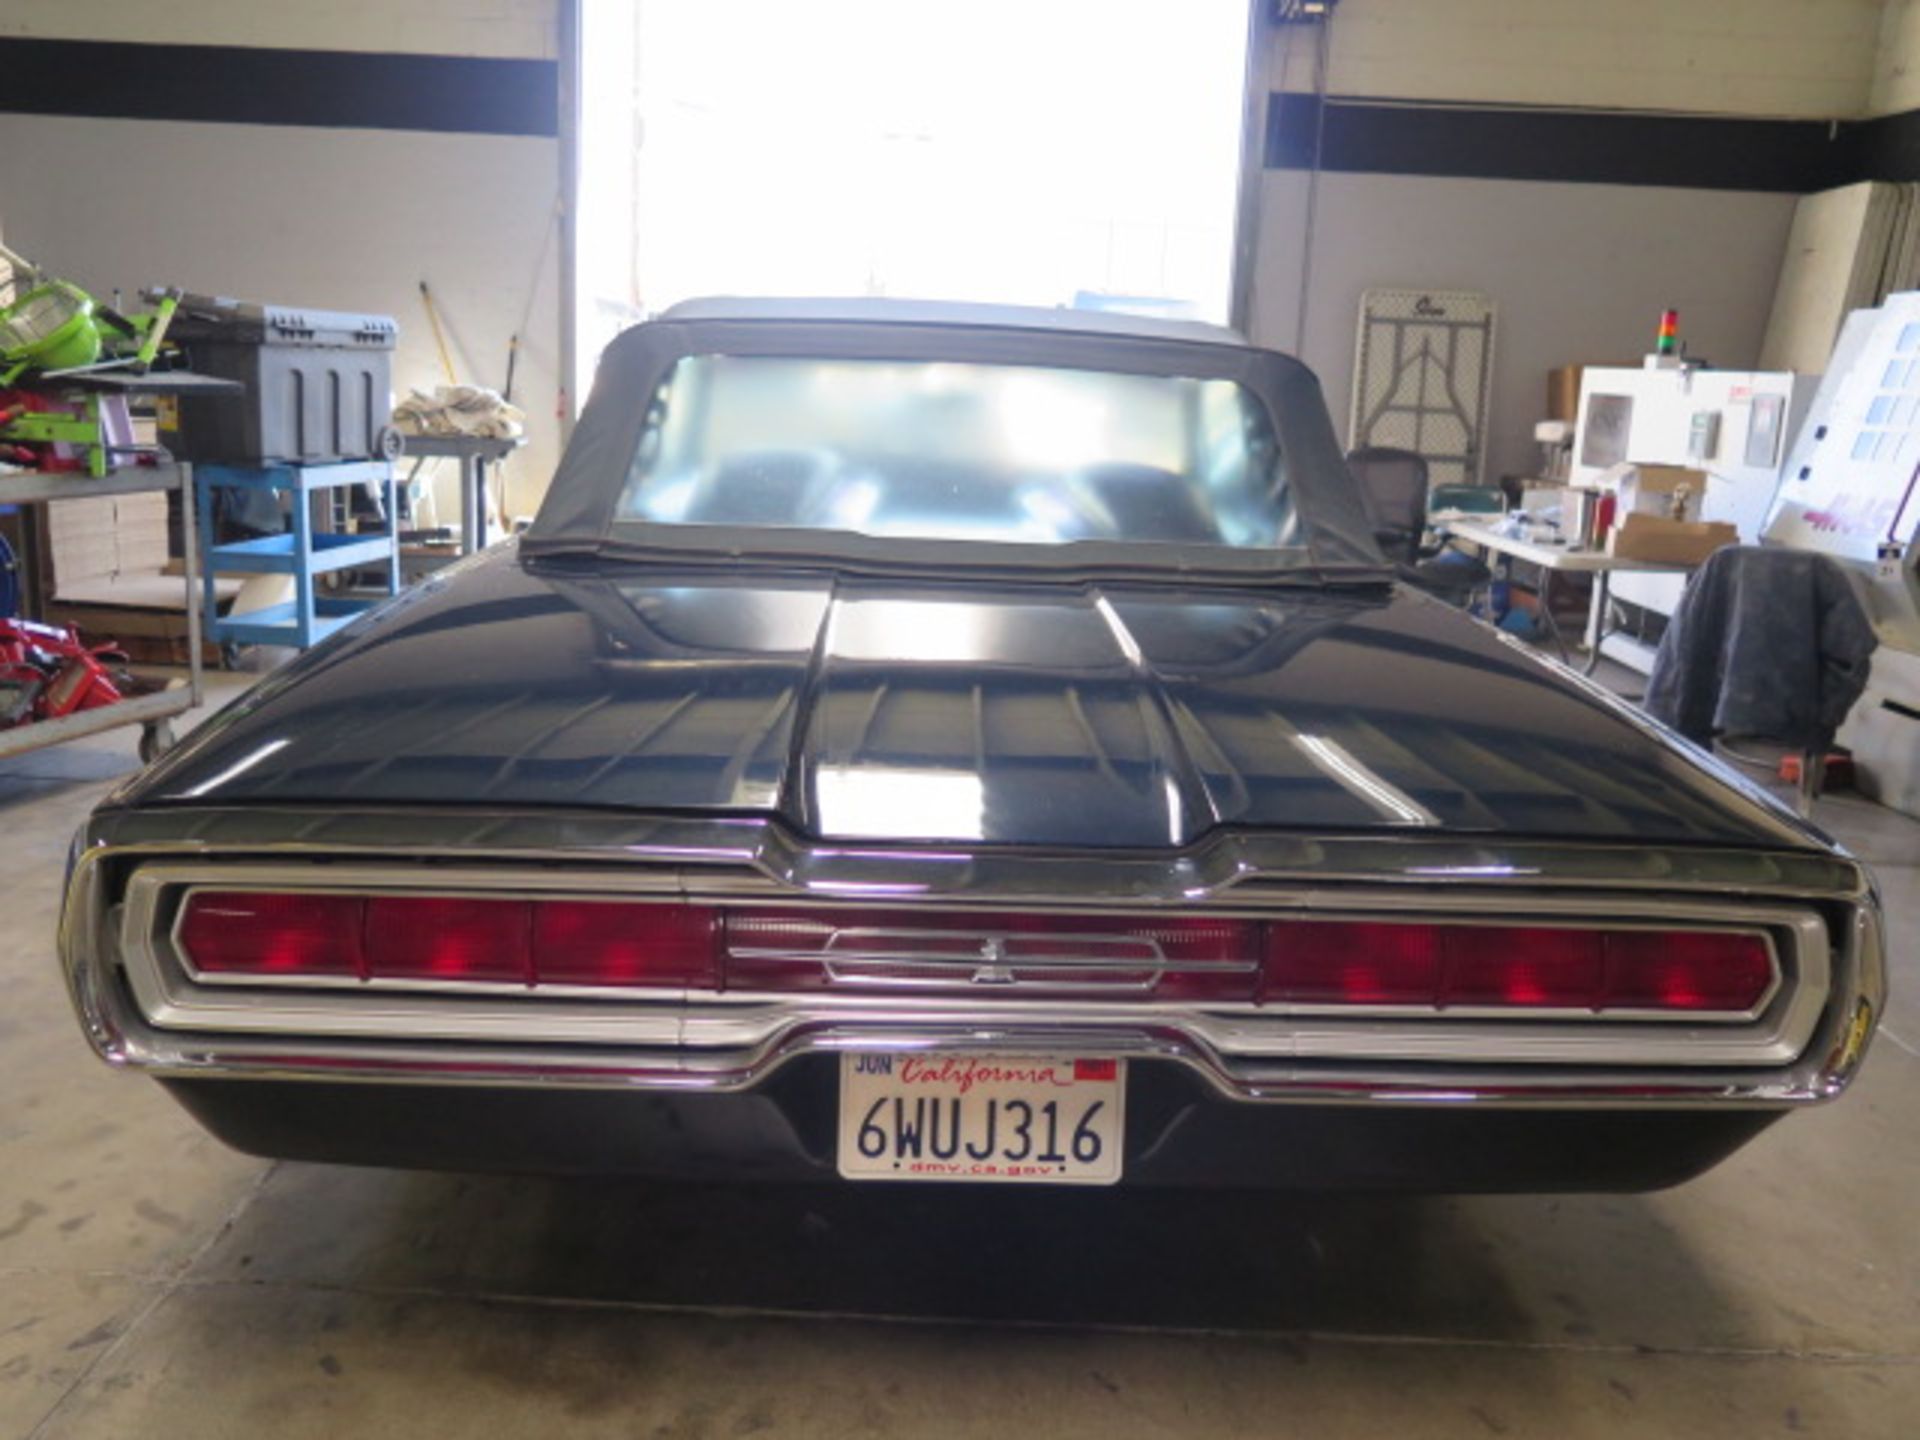 1966 Ford Thunderbird Convertible, Rare Q Code 428 w/ 3x2 Carburetors. (SOLD AS-IS - NO WARRANTY) - Image 5 of 45